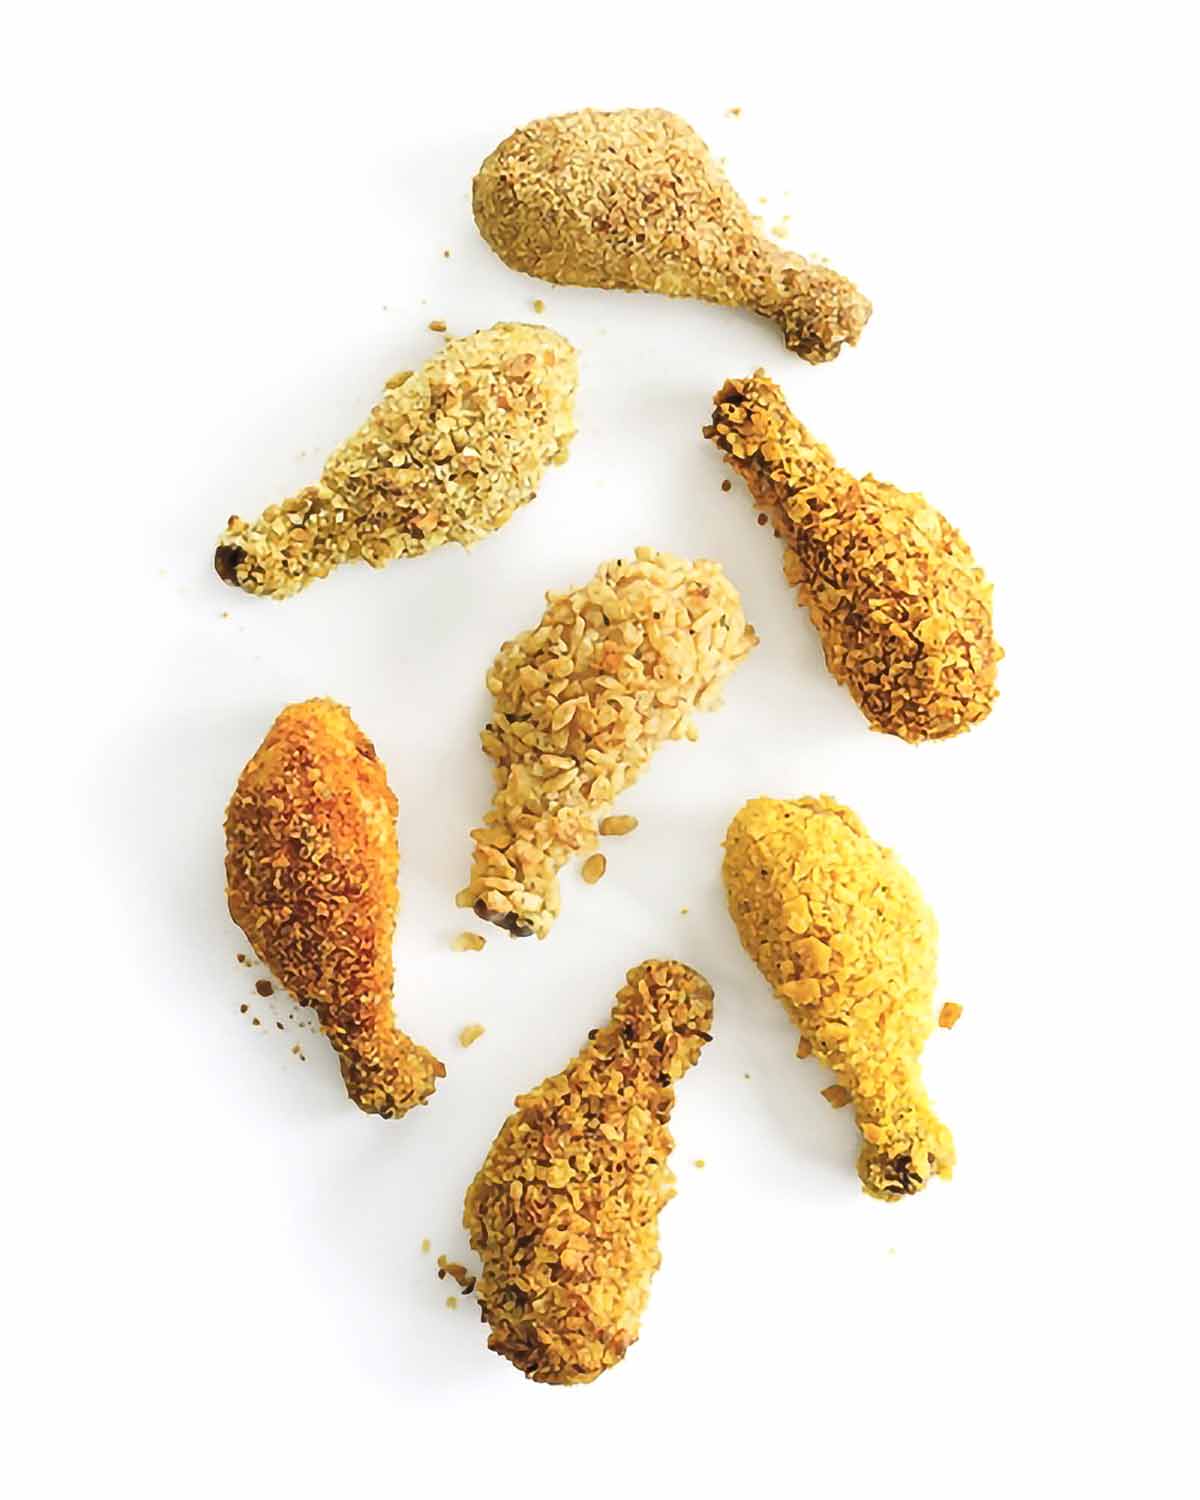 Seven oven fried drumsticks with different coatings on a white background.